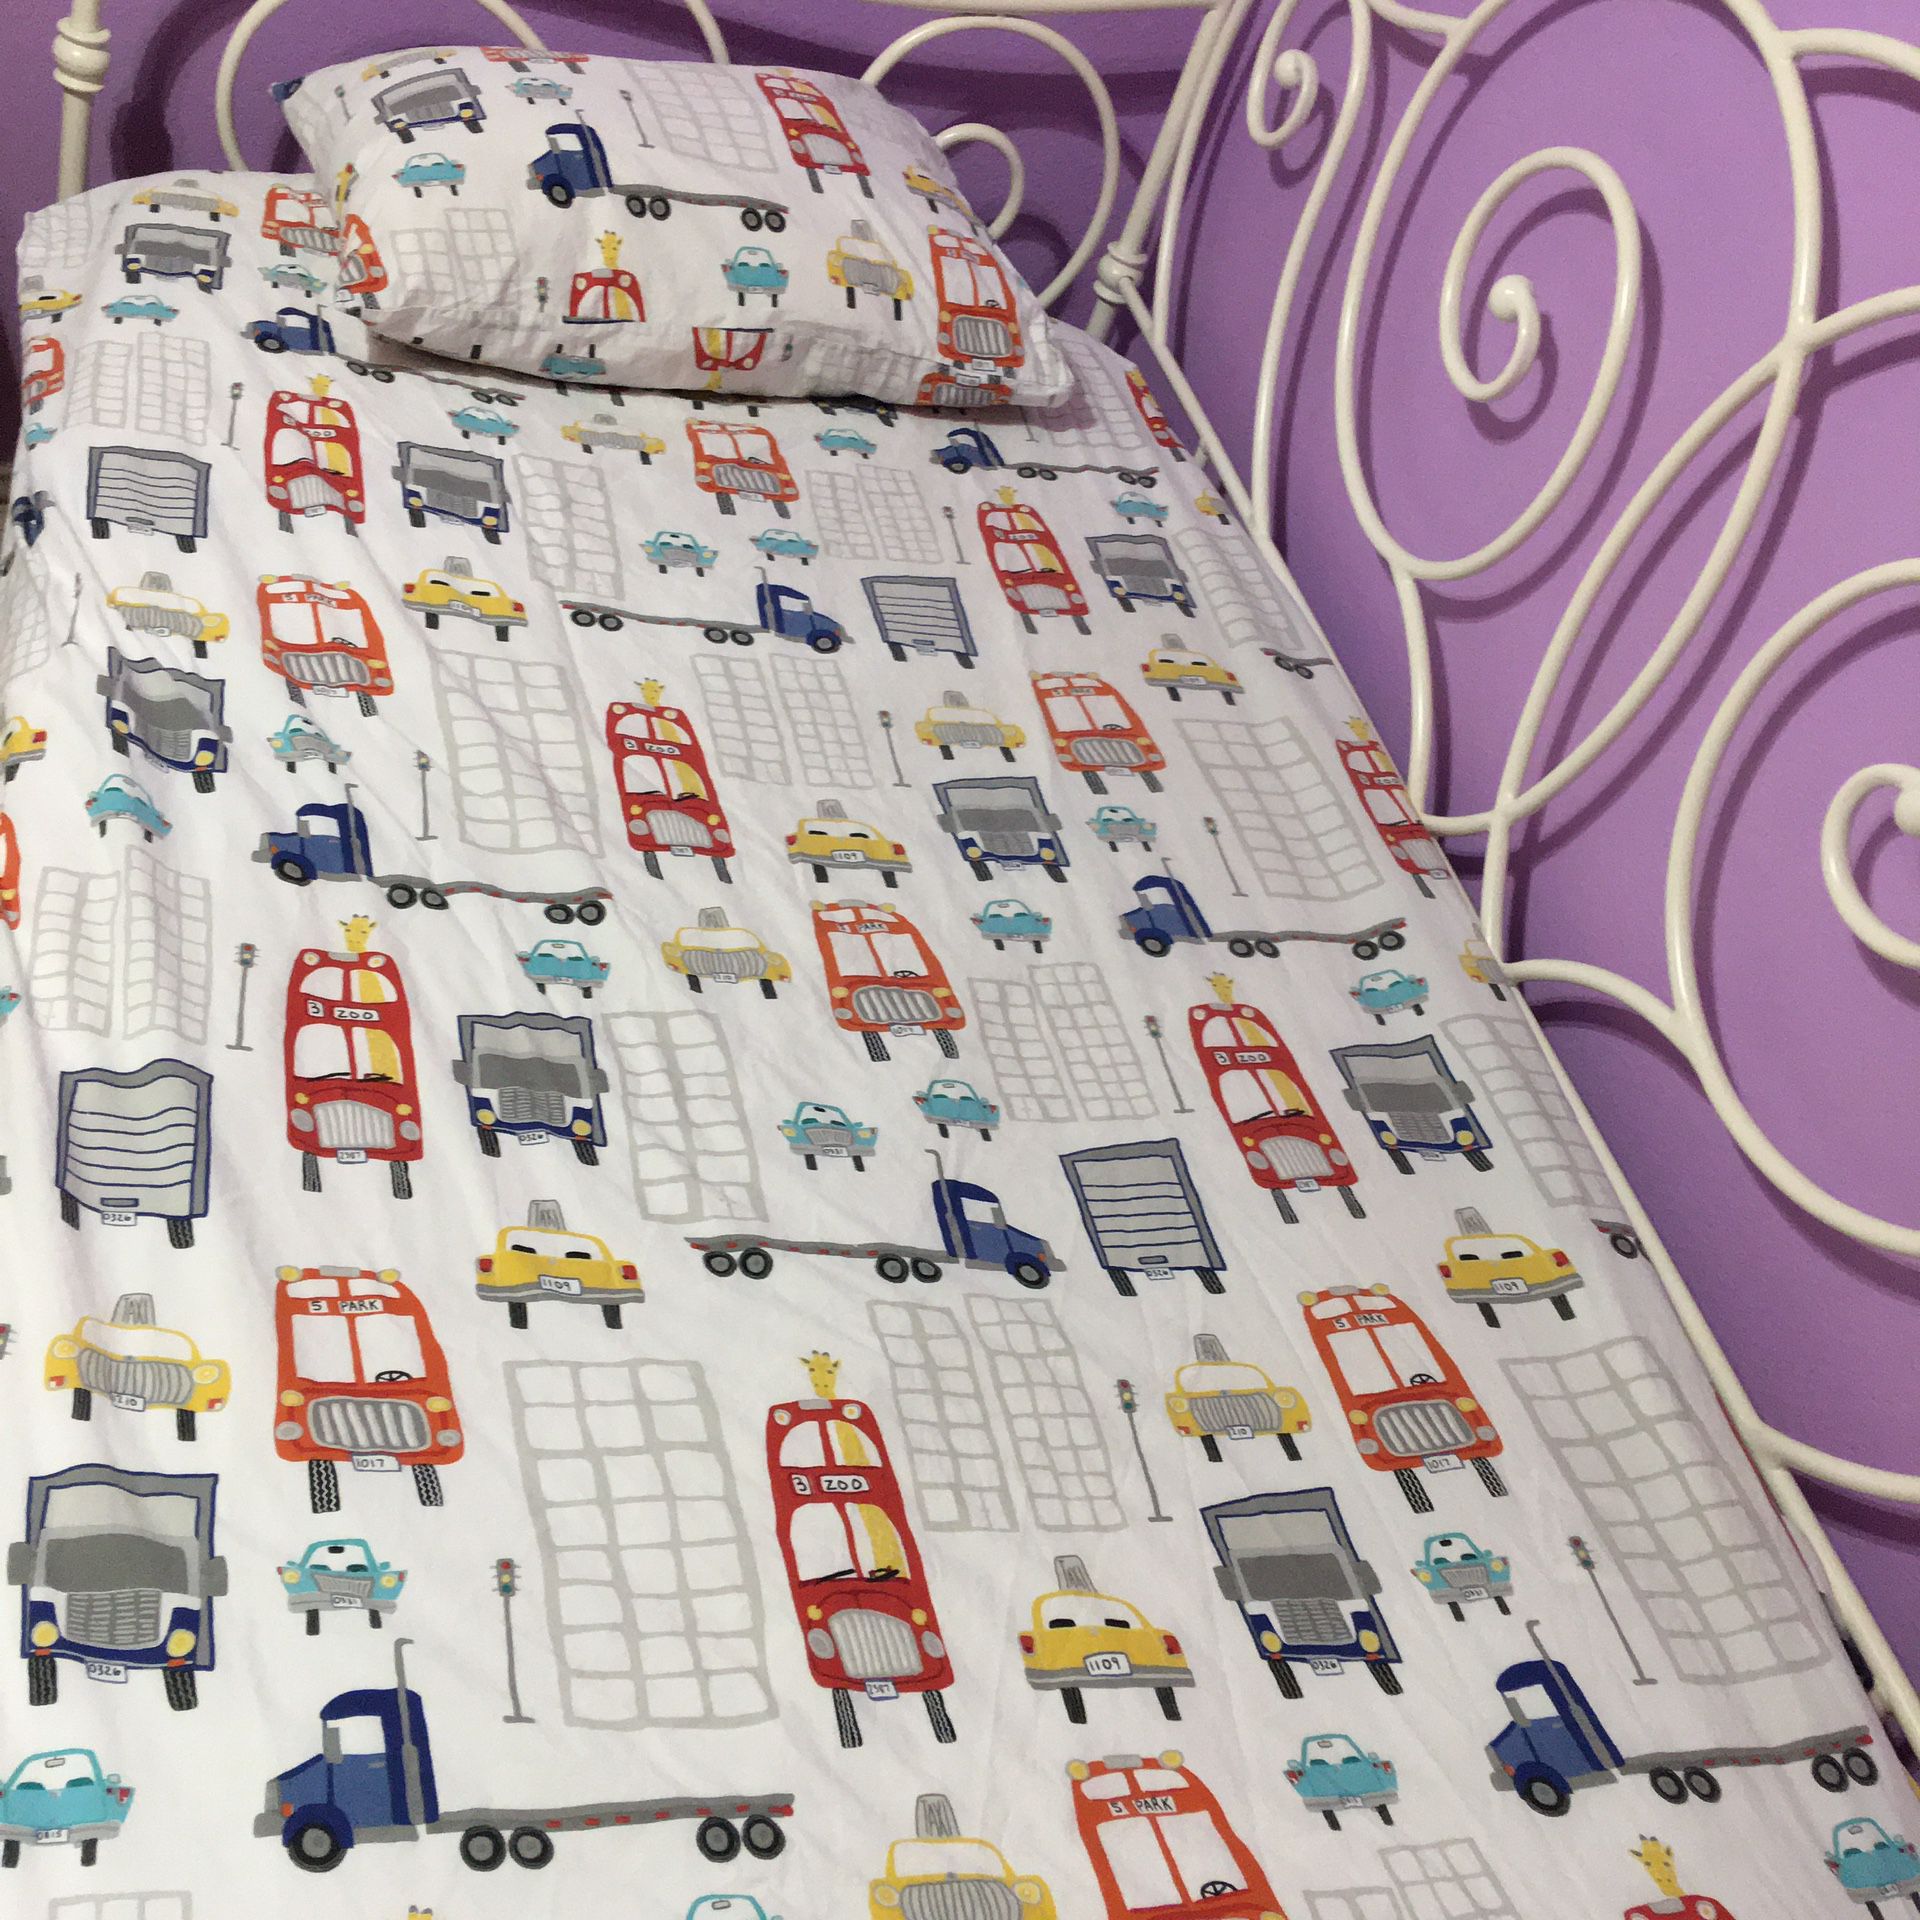 Pottery Barn Twin Sheets with Cars, Taxis, Busses and Trucks